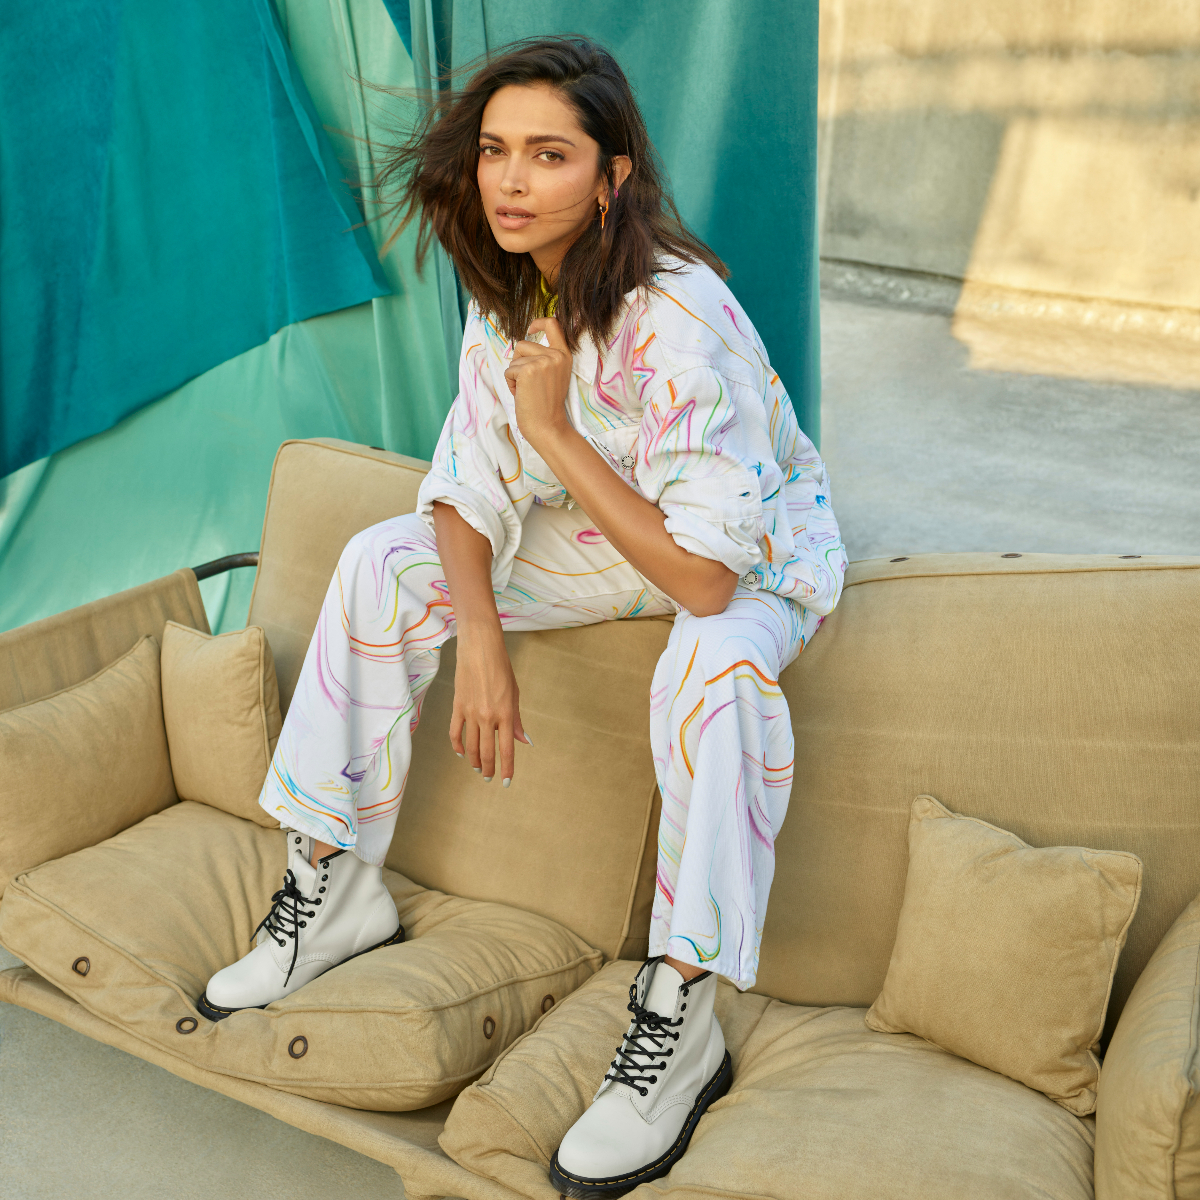 The all-new second edition of Levi’s X Deepika Padukone is screaming summer fashion!